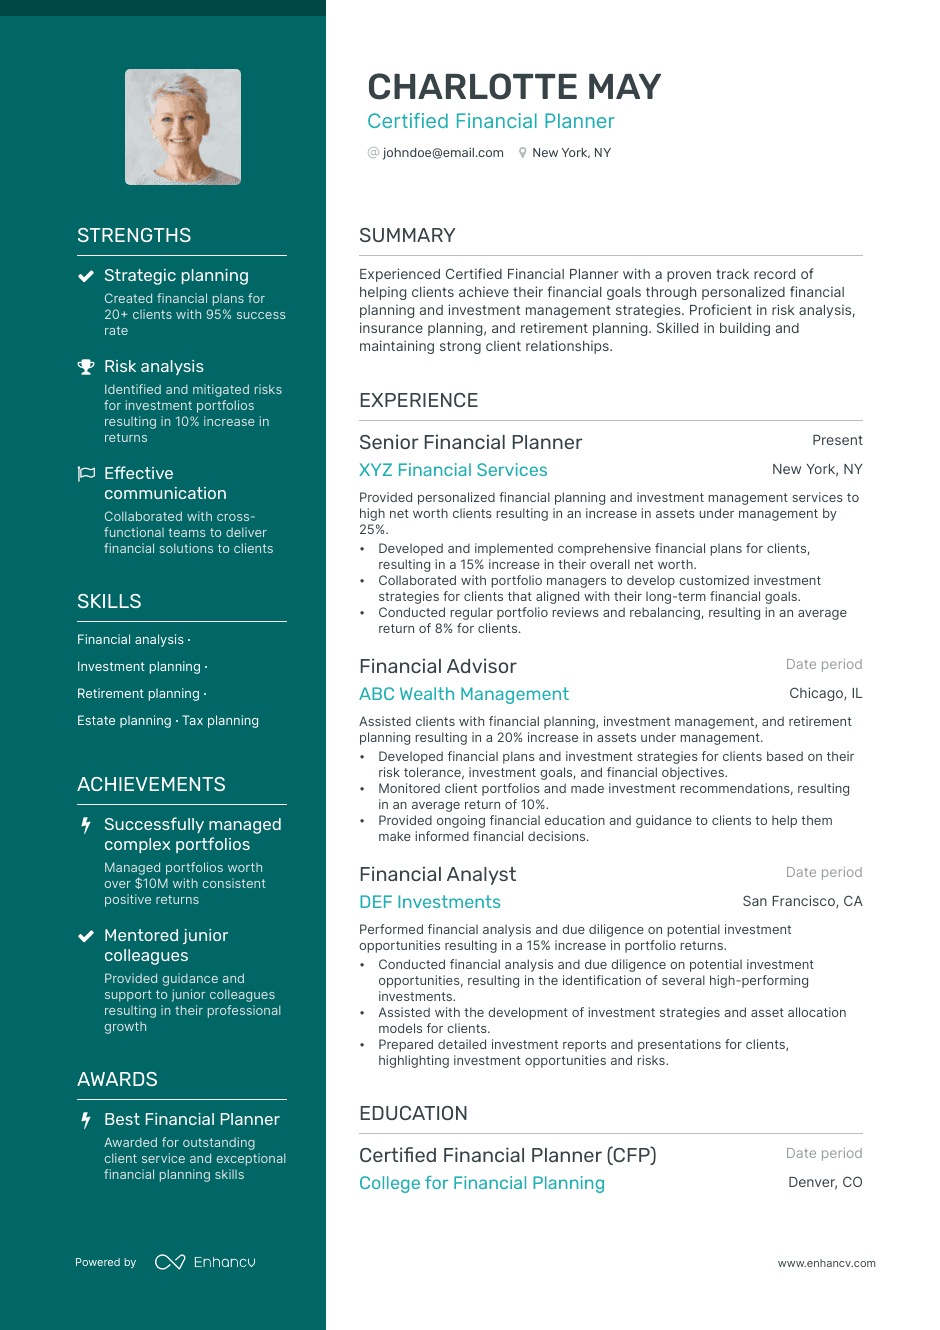 Certified Financial Planner resume example